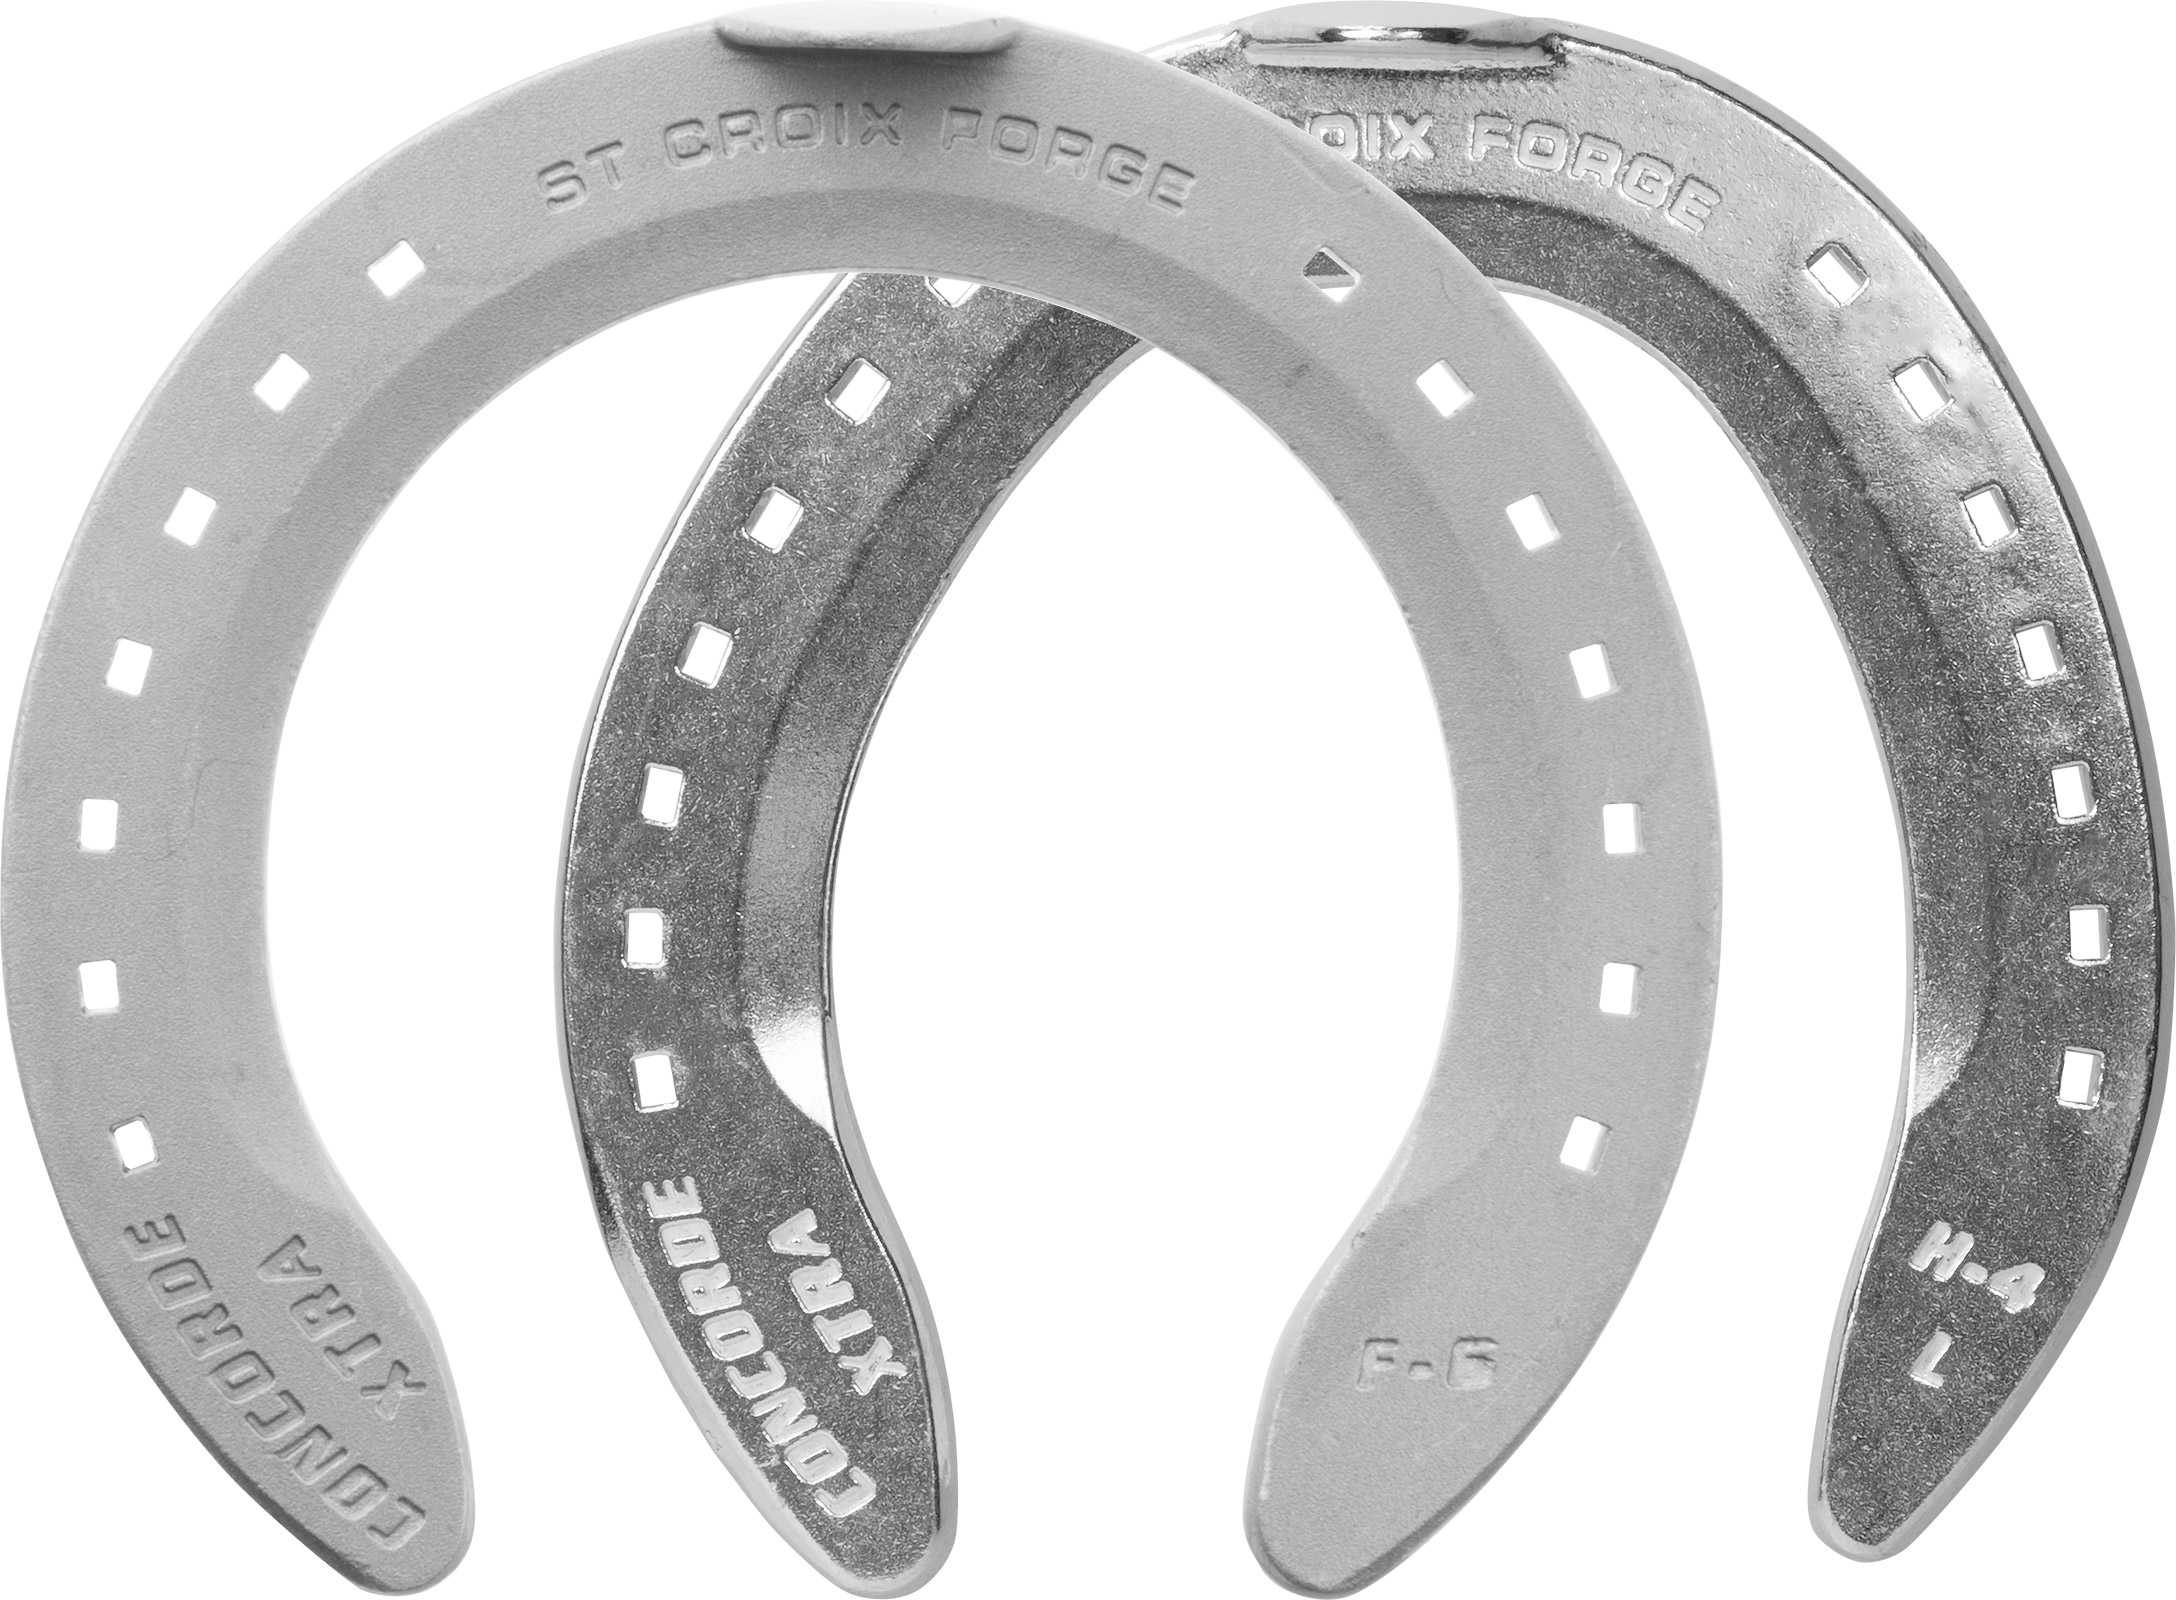 St. Croix Concorde Extra Aluminium horseshoes, front and hind, hoof side view